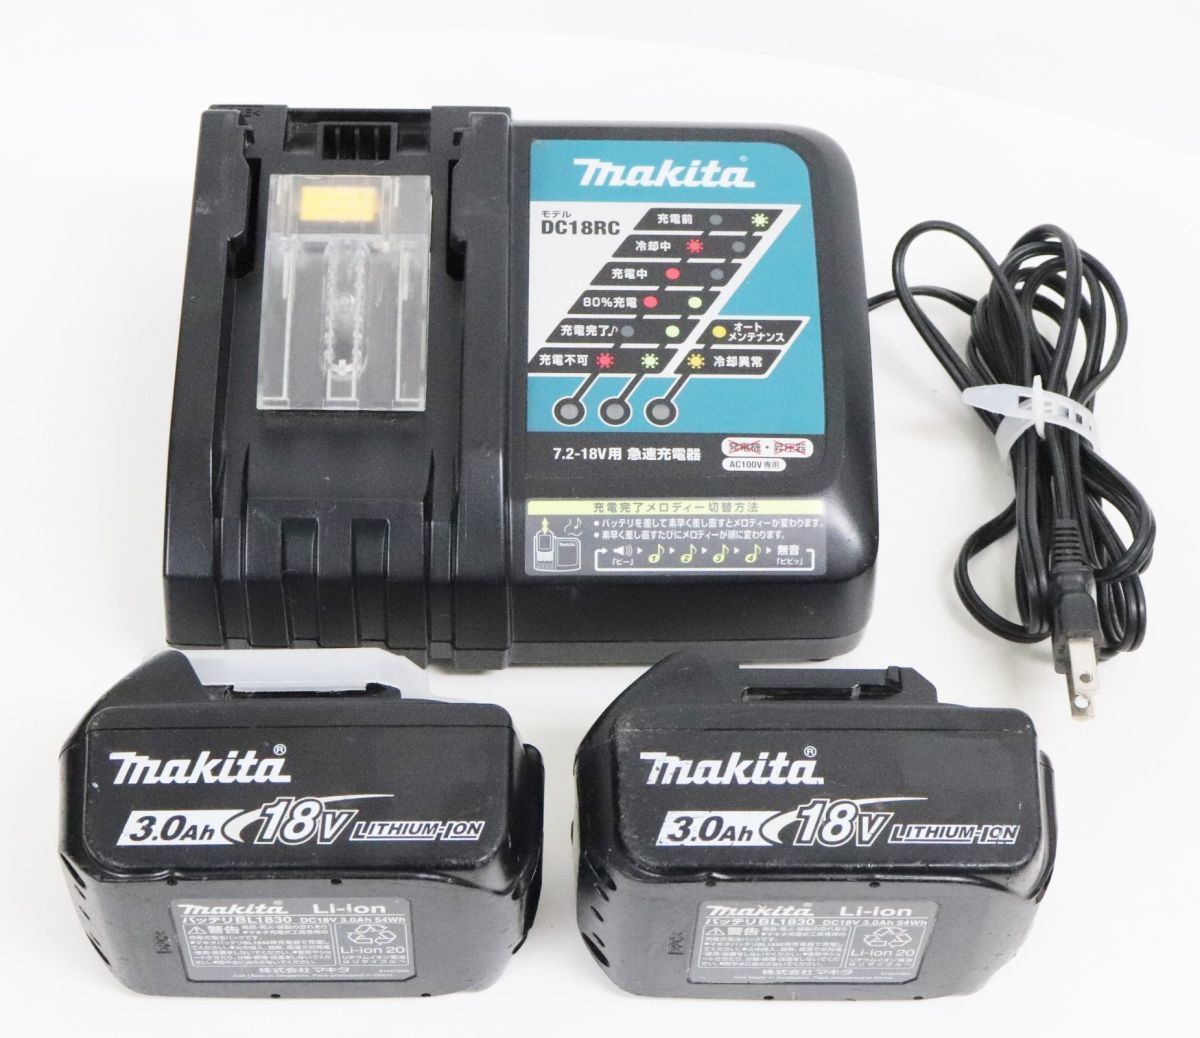  secondhand goods makita Makita rechargeable impact driver TD149DRFX 18V 3.0Ah battery 2 piece attaching set goods blue #4449-1